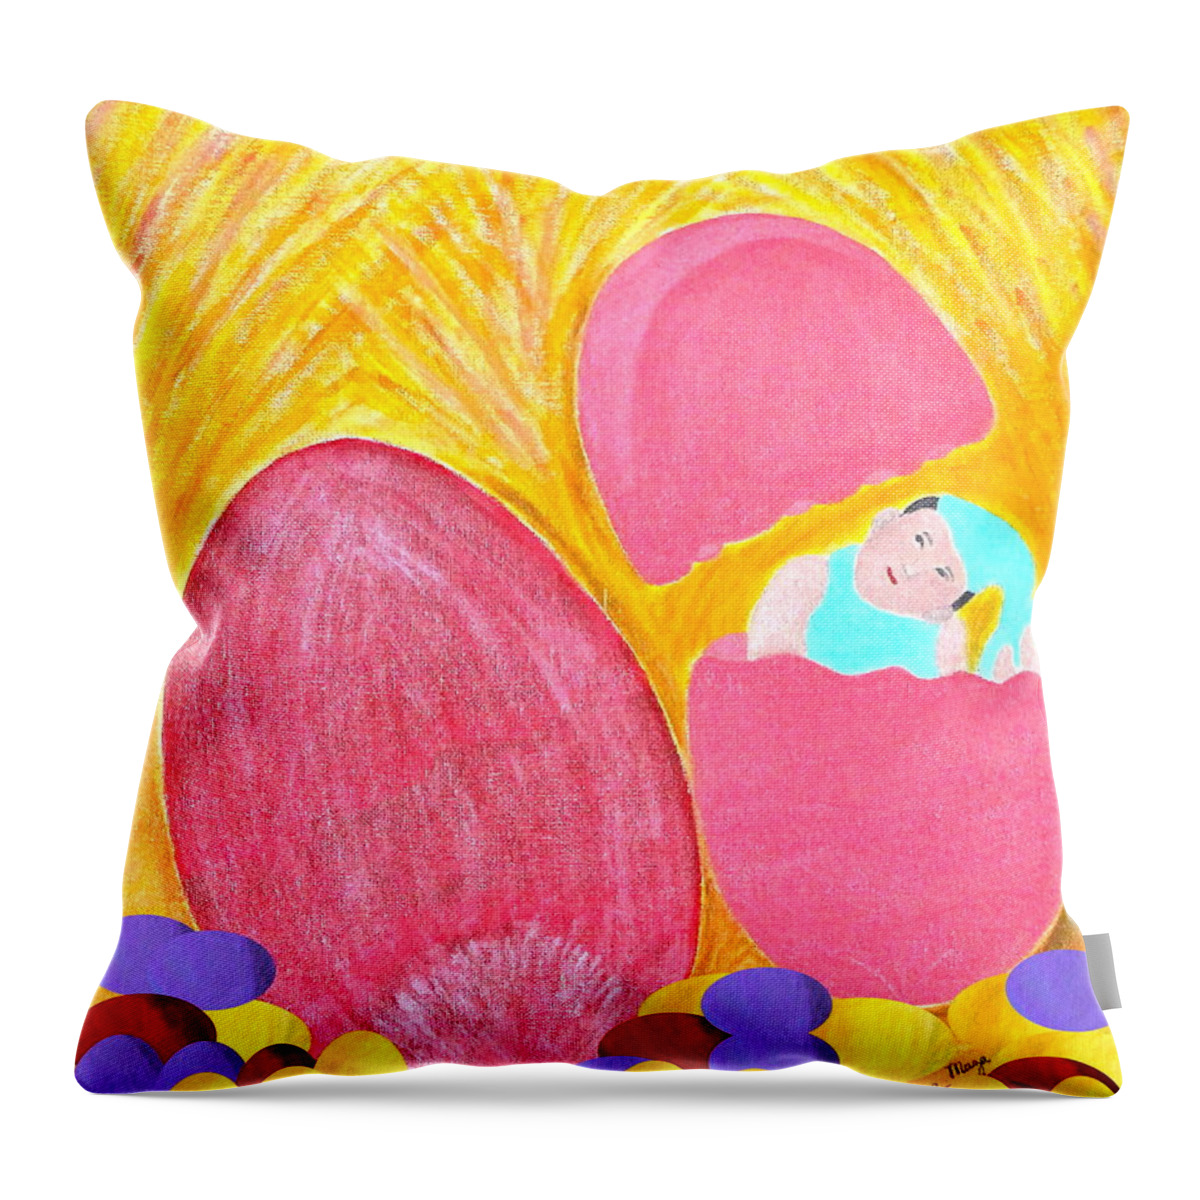 Caricature Throw Pillow featuring the painting Eggs by Lorna Maza